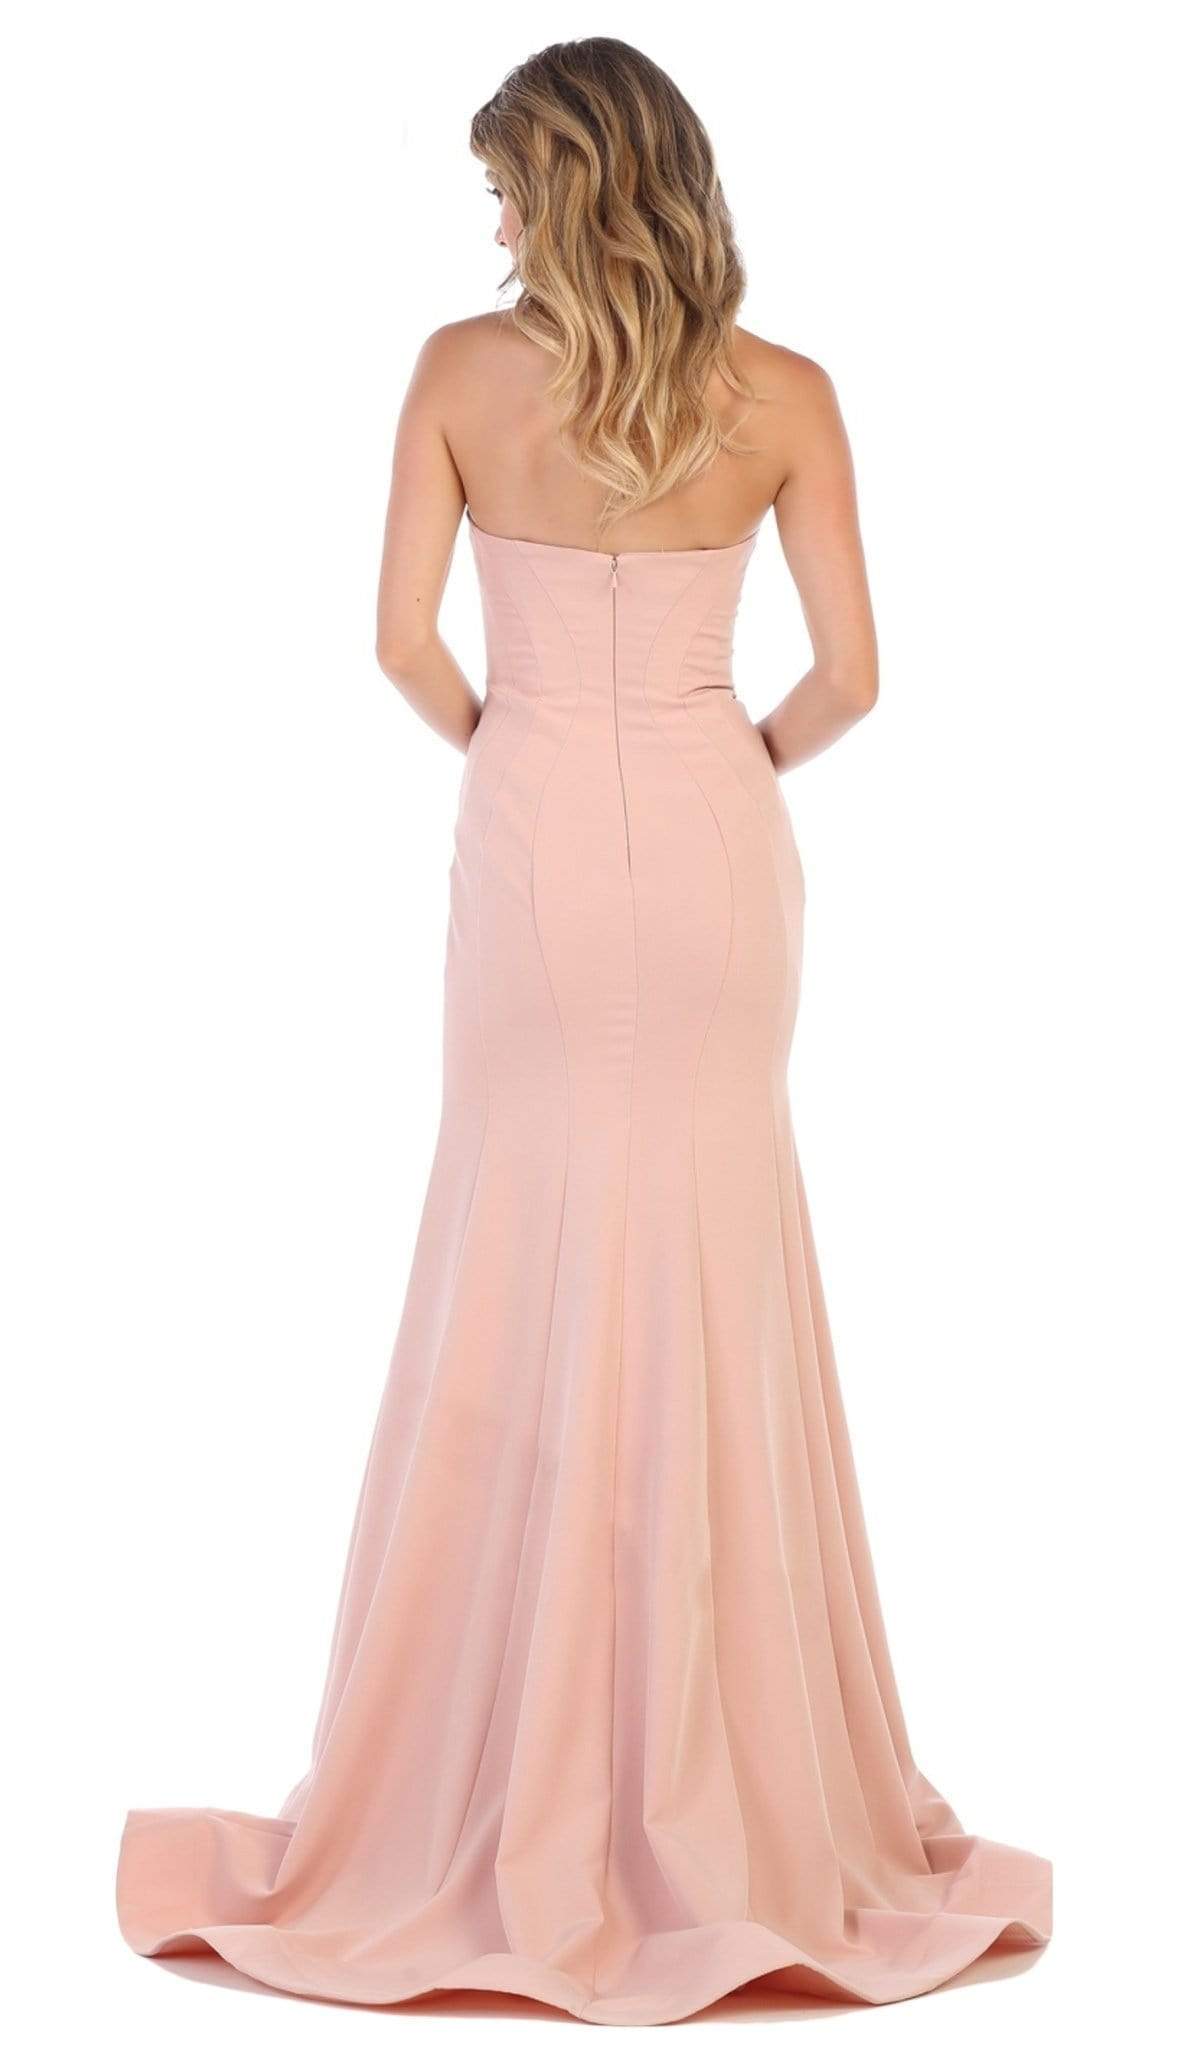 May Queen - RQ7703 Strapless Sweetheart Trumpet Evening Dress Bridesmaid Dresses